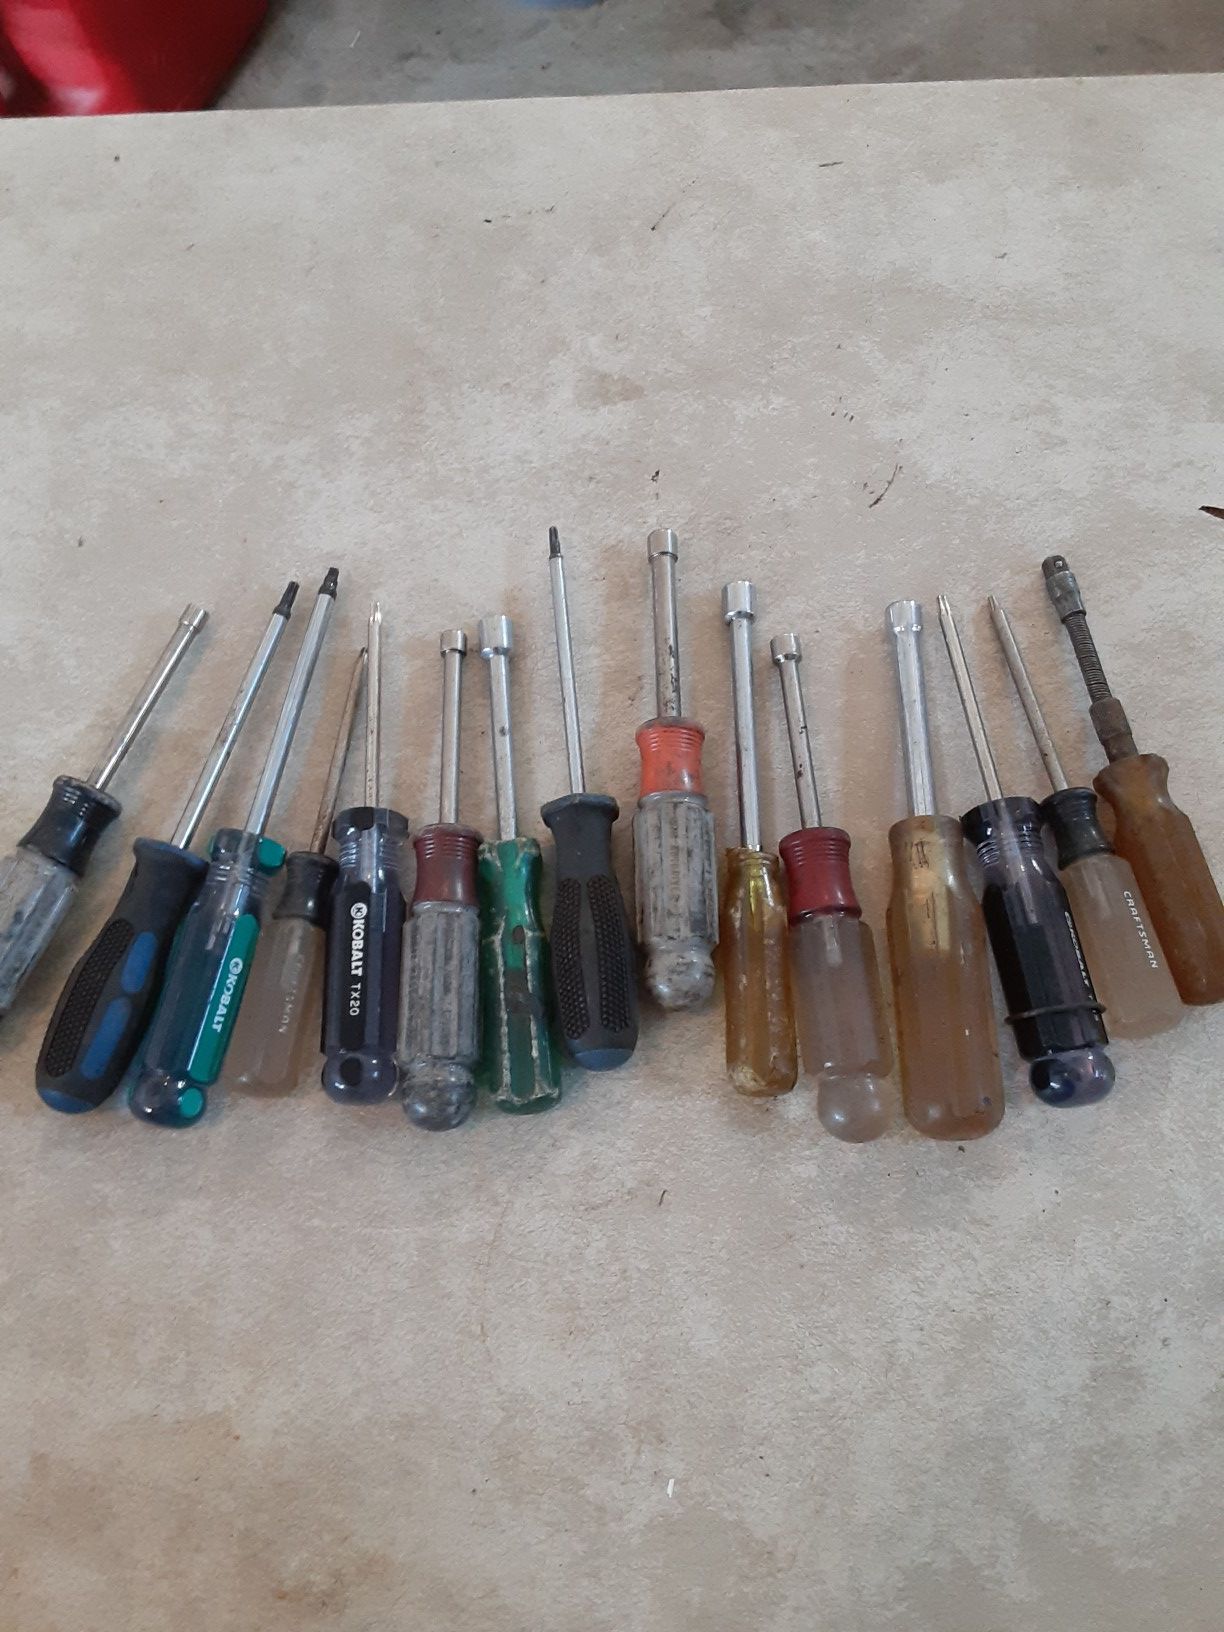 Nut drivers & Torx. Miscellaneous lot of 15 pieces. Porch Pick up in North Hagerstown Md.